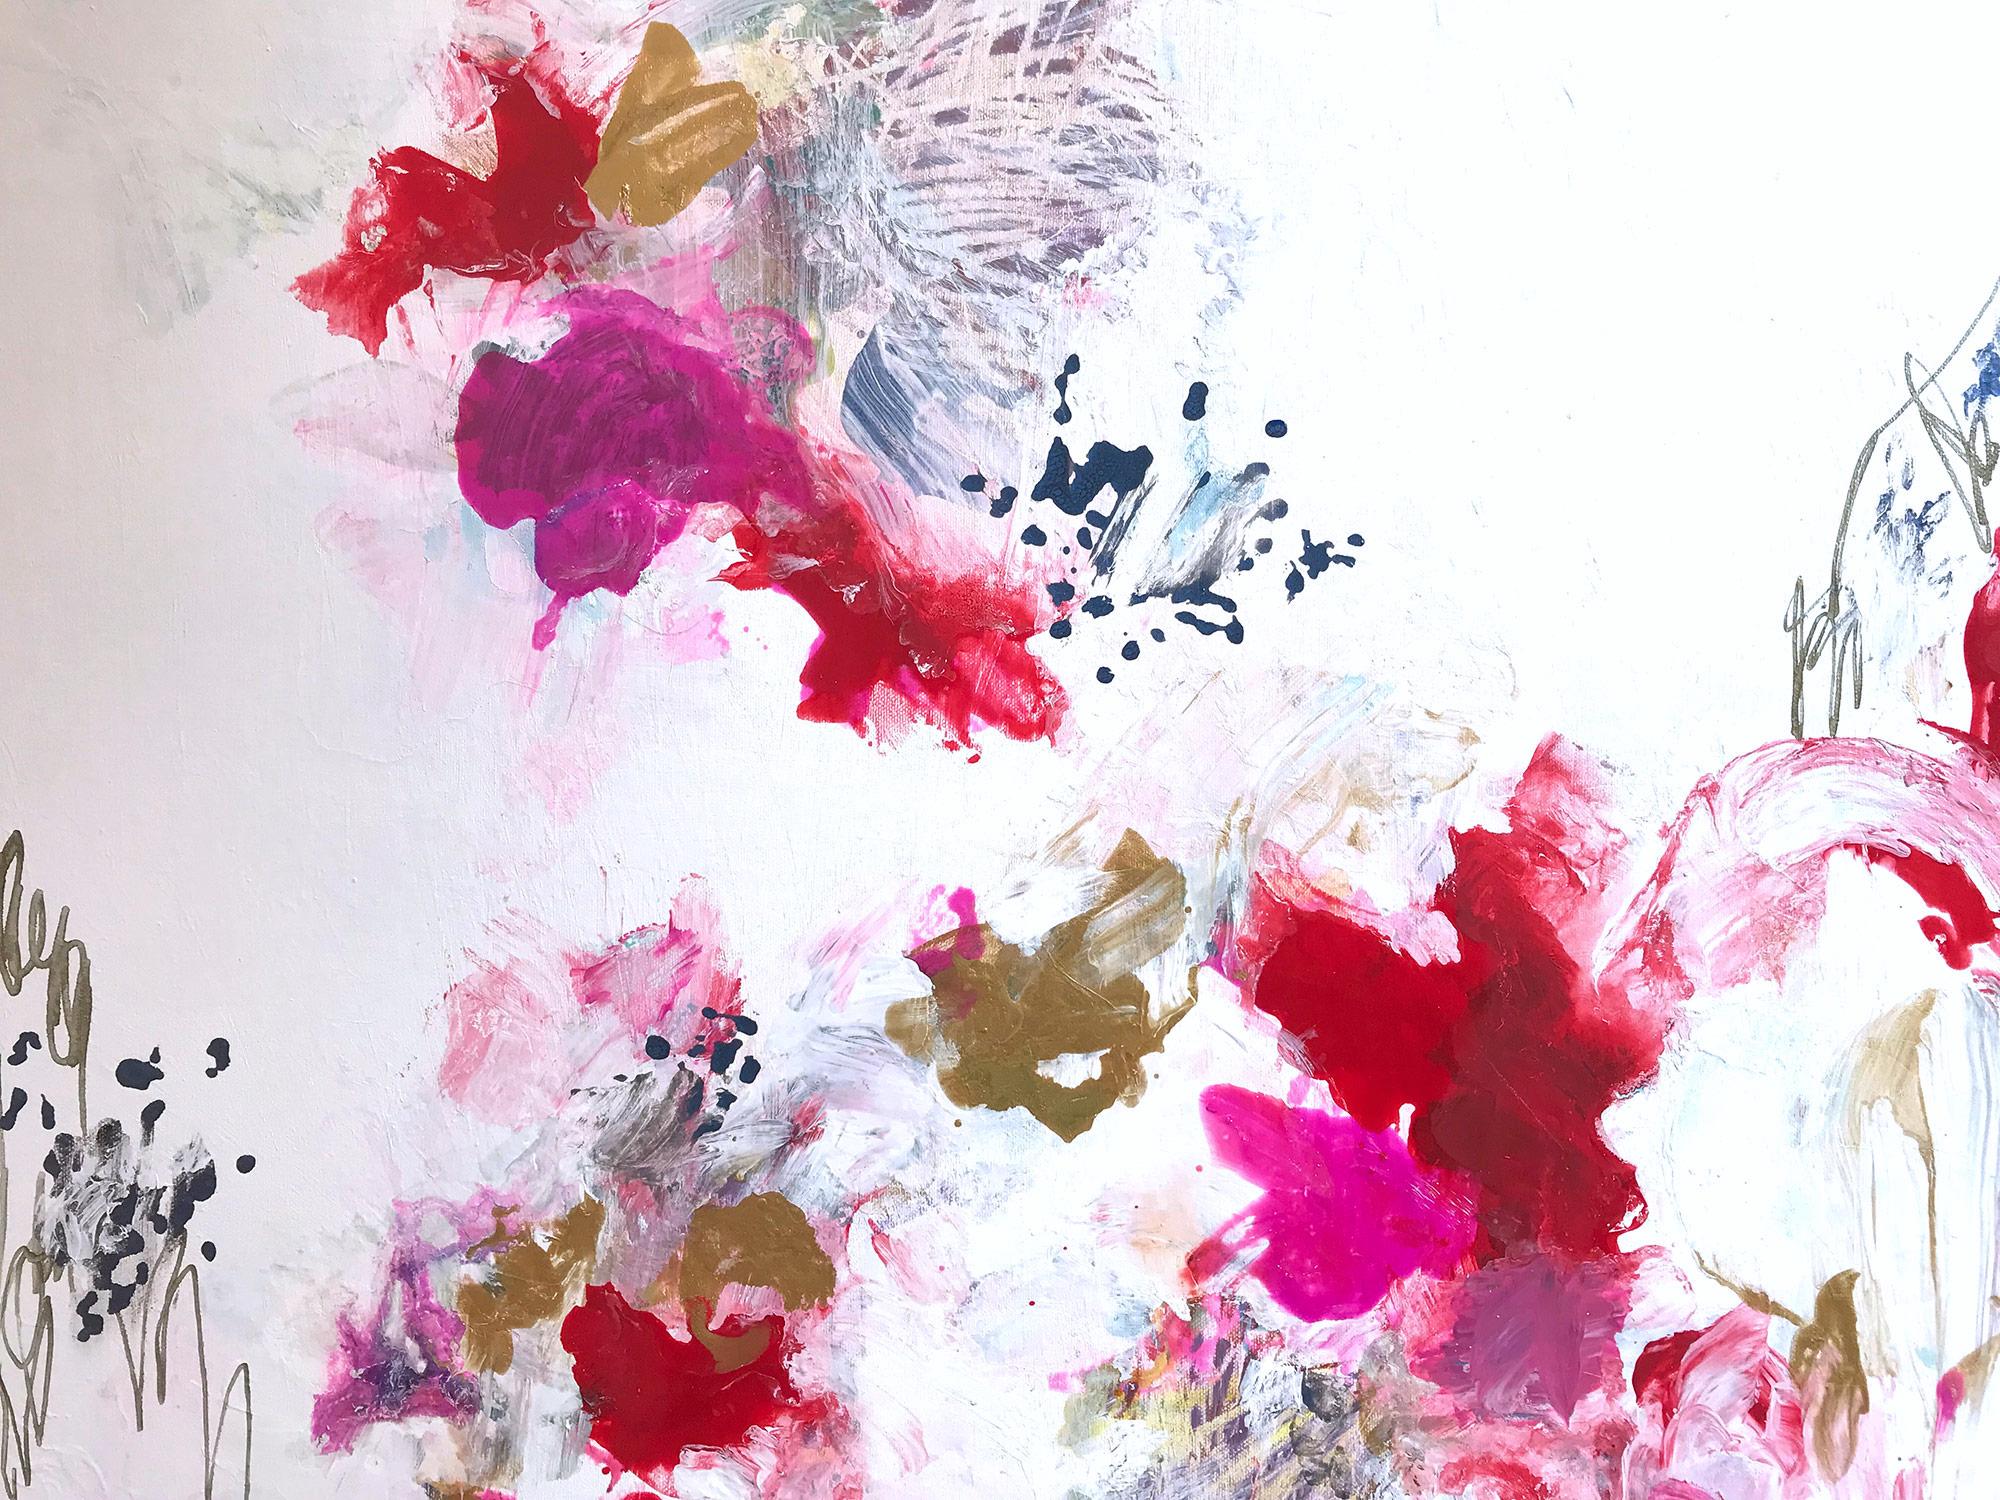 Corinne Natel - "Geisha #1" Contemporary Colorful Fluid Mixed Media  Painting on Gallery Canvas For Sale at 1stDibs